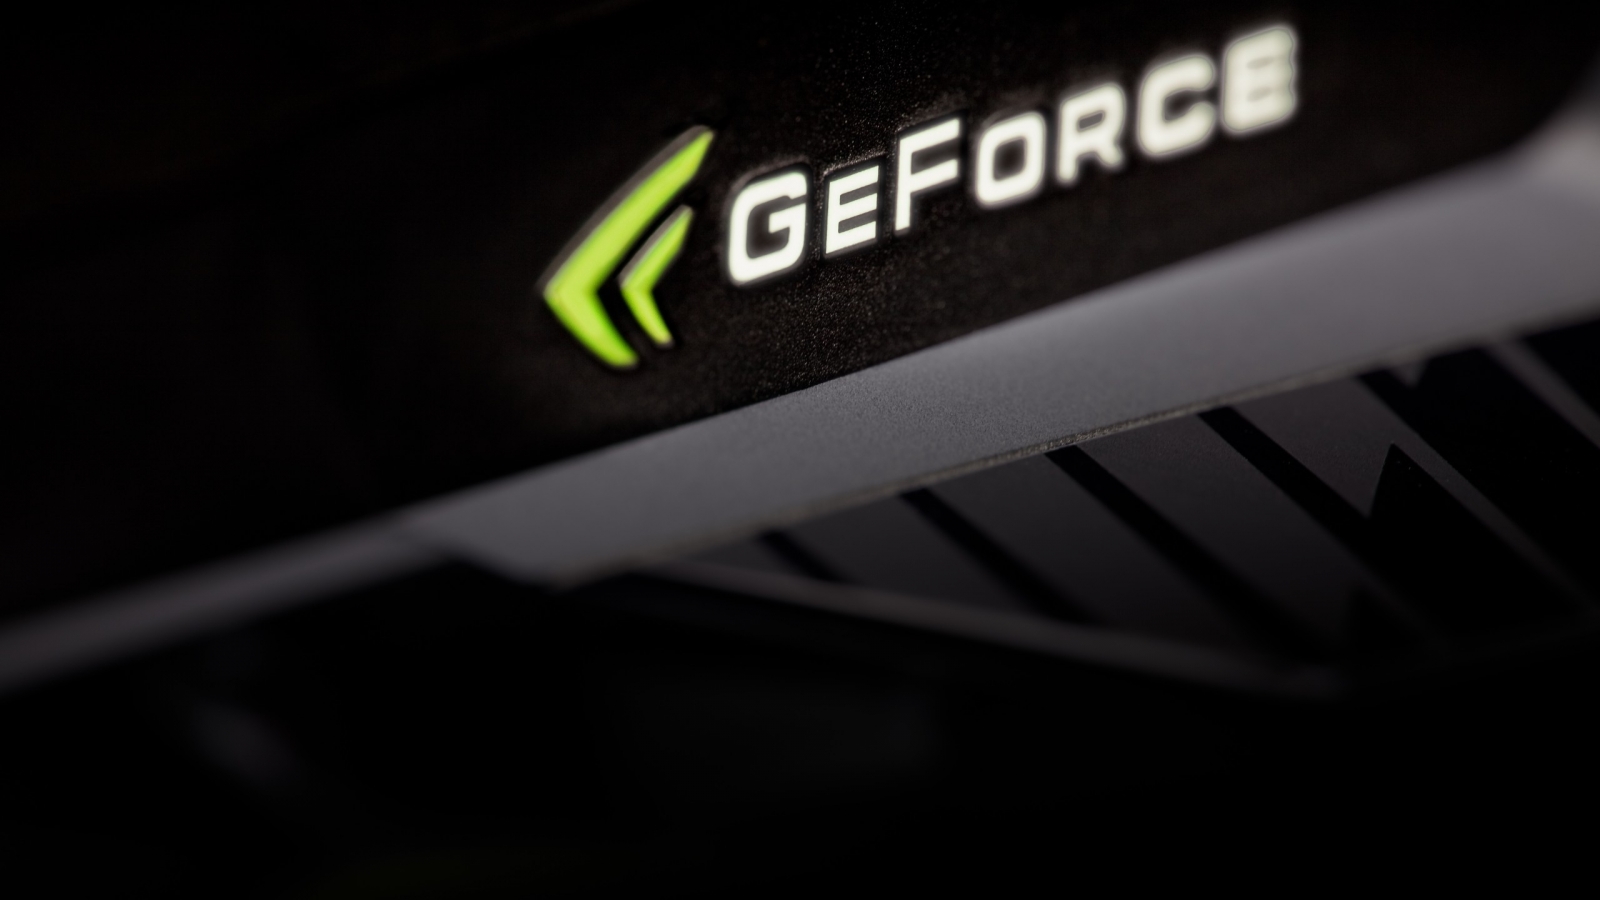 GeForce Graphics for 1600 x 900 HDTV resolution